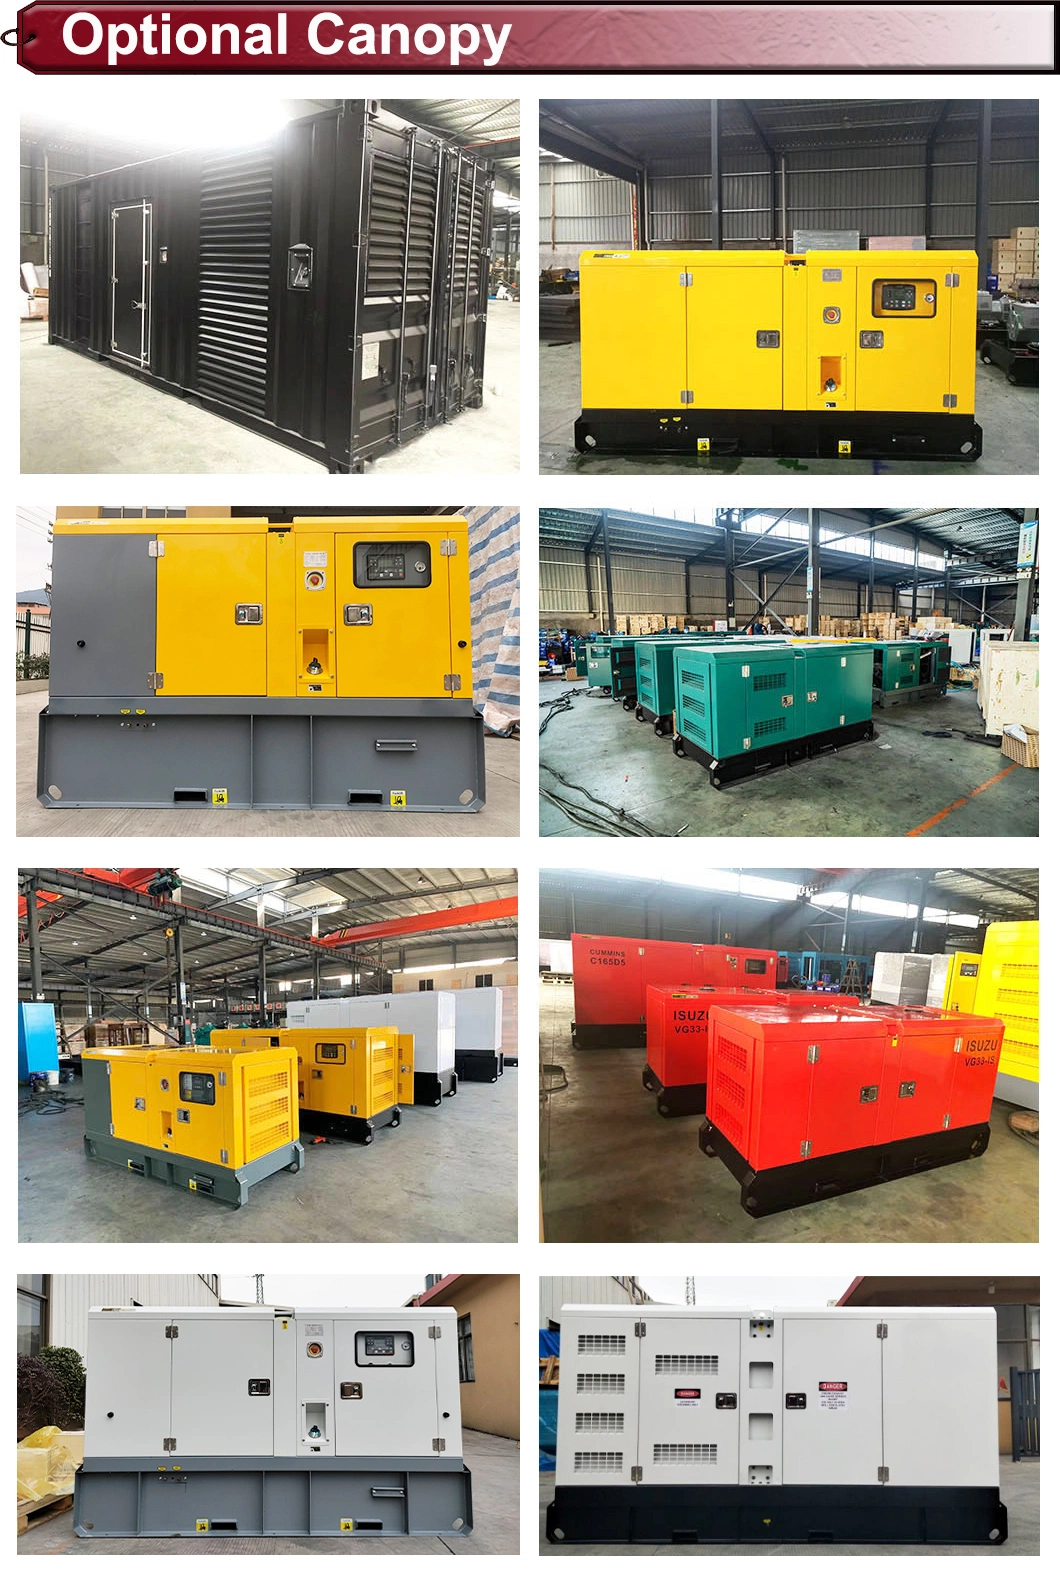 Manufacture Cheap Chengdu Weichai Series Low Rpm Brushless Three-Phase Electric Generator Set 50kw-200kw 3 -Phase 50kw Generator Diesel Price Whoule Sale